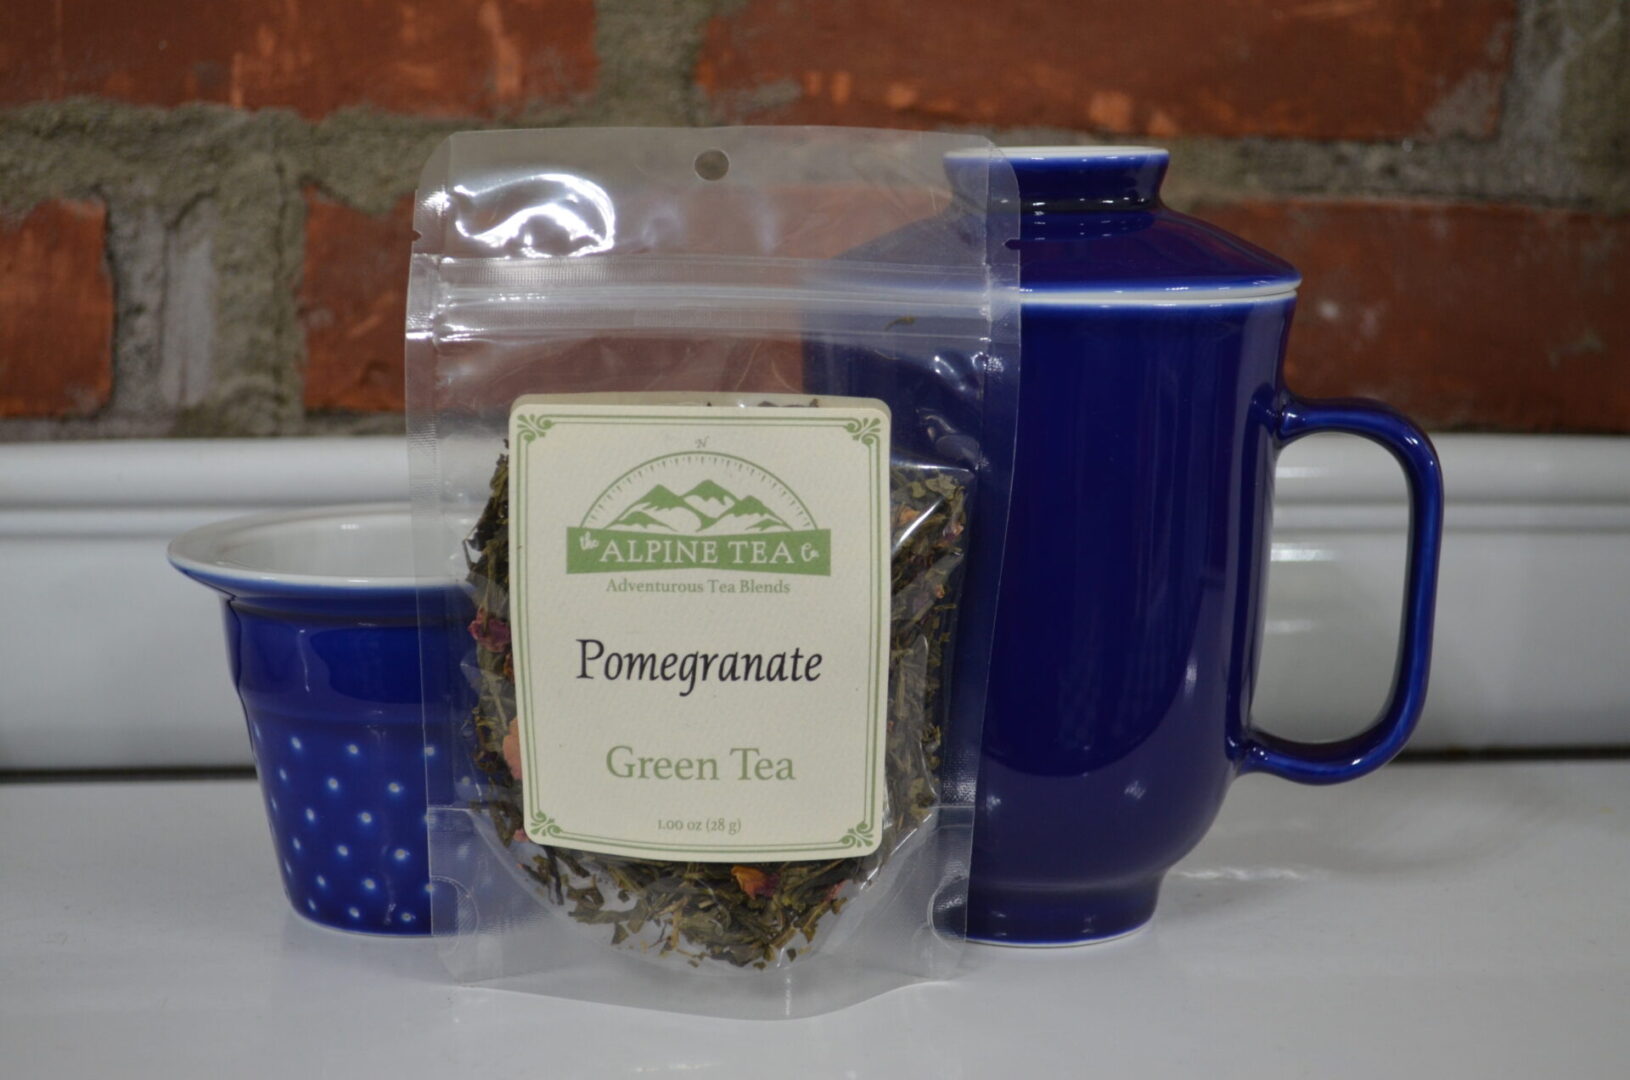 A bag of green tea and two cups on a table.